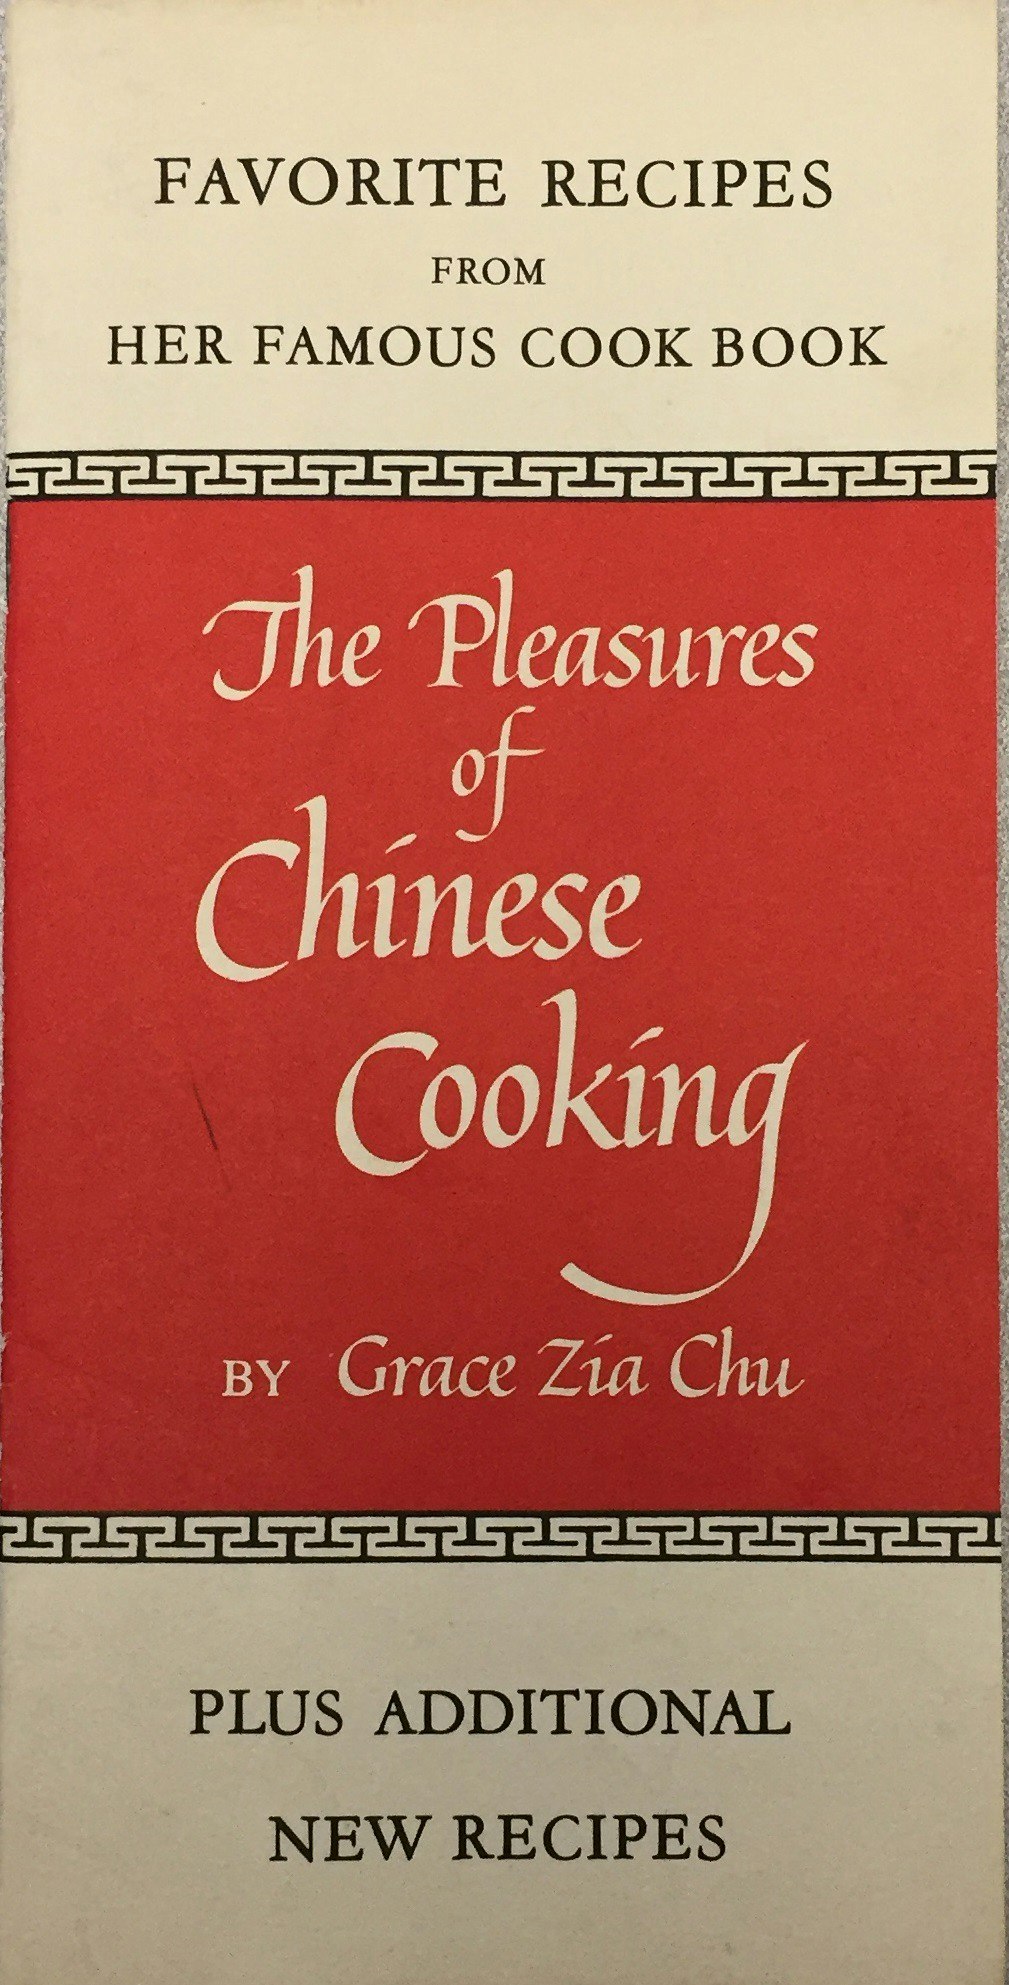 Front cover of Grace Chu's book, "The Pleasures of Chinese Cooking."